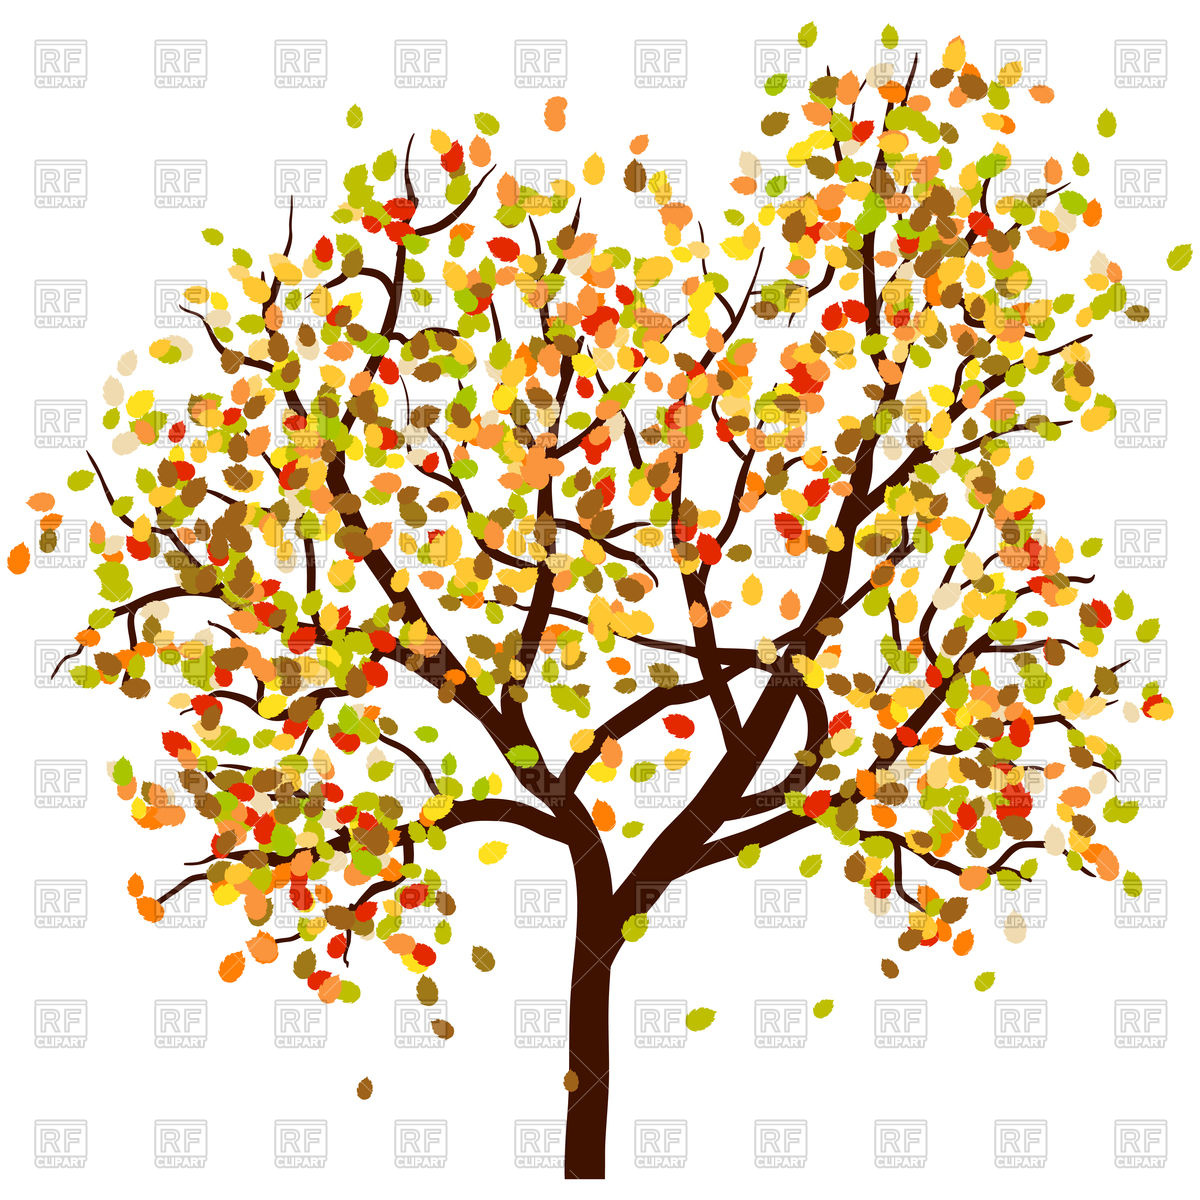 Autumn birch tree with falling leaves Vector Image #106814.